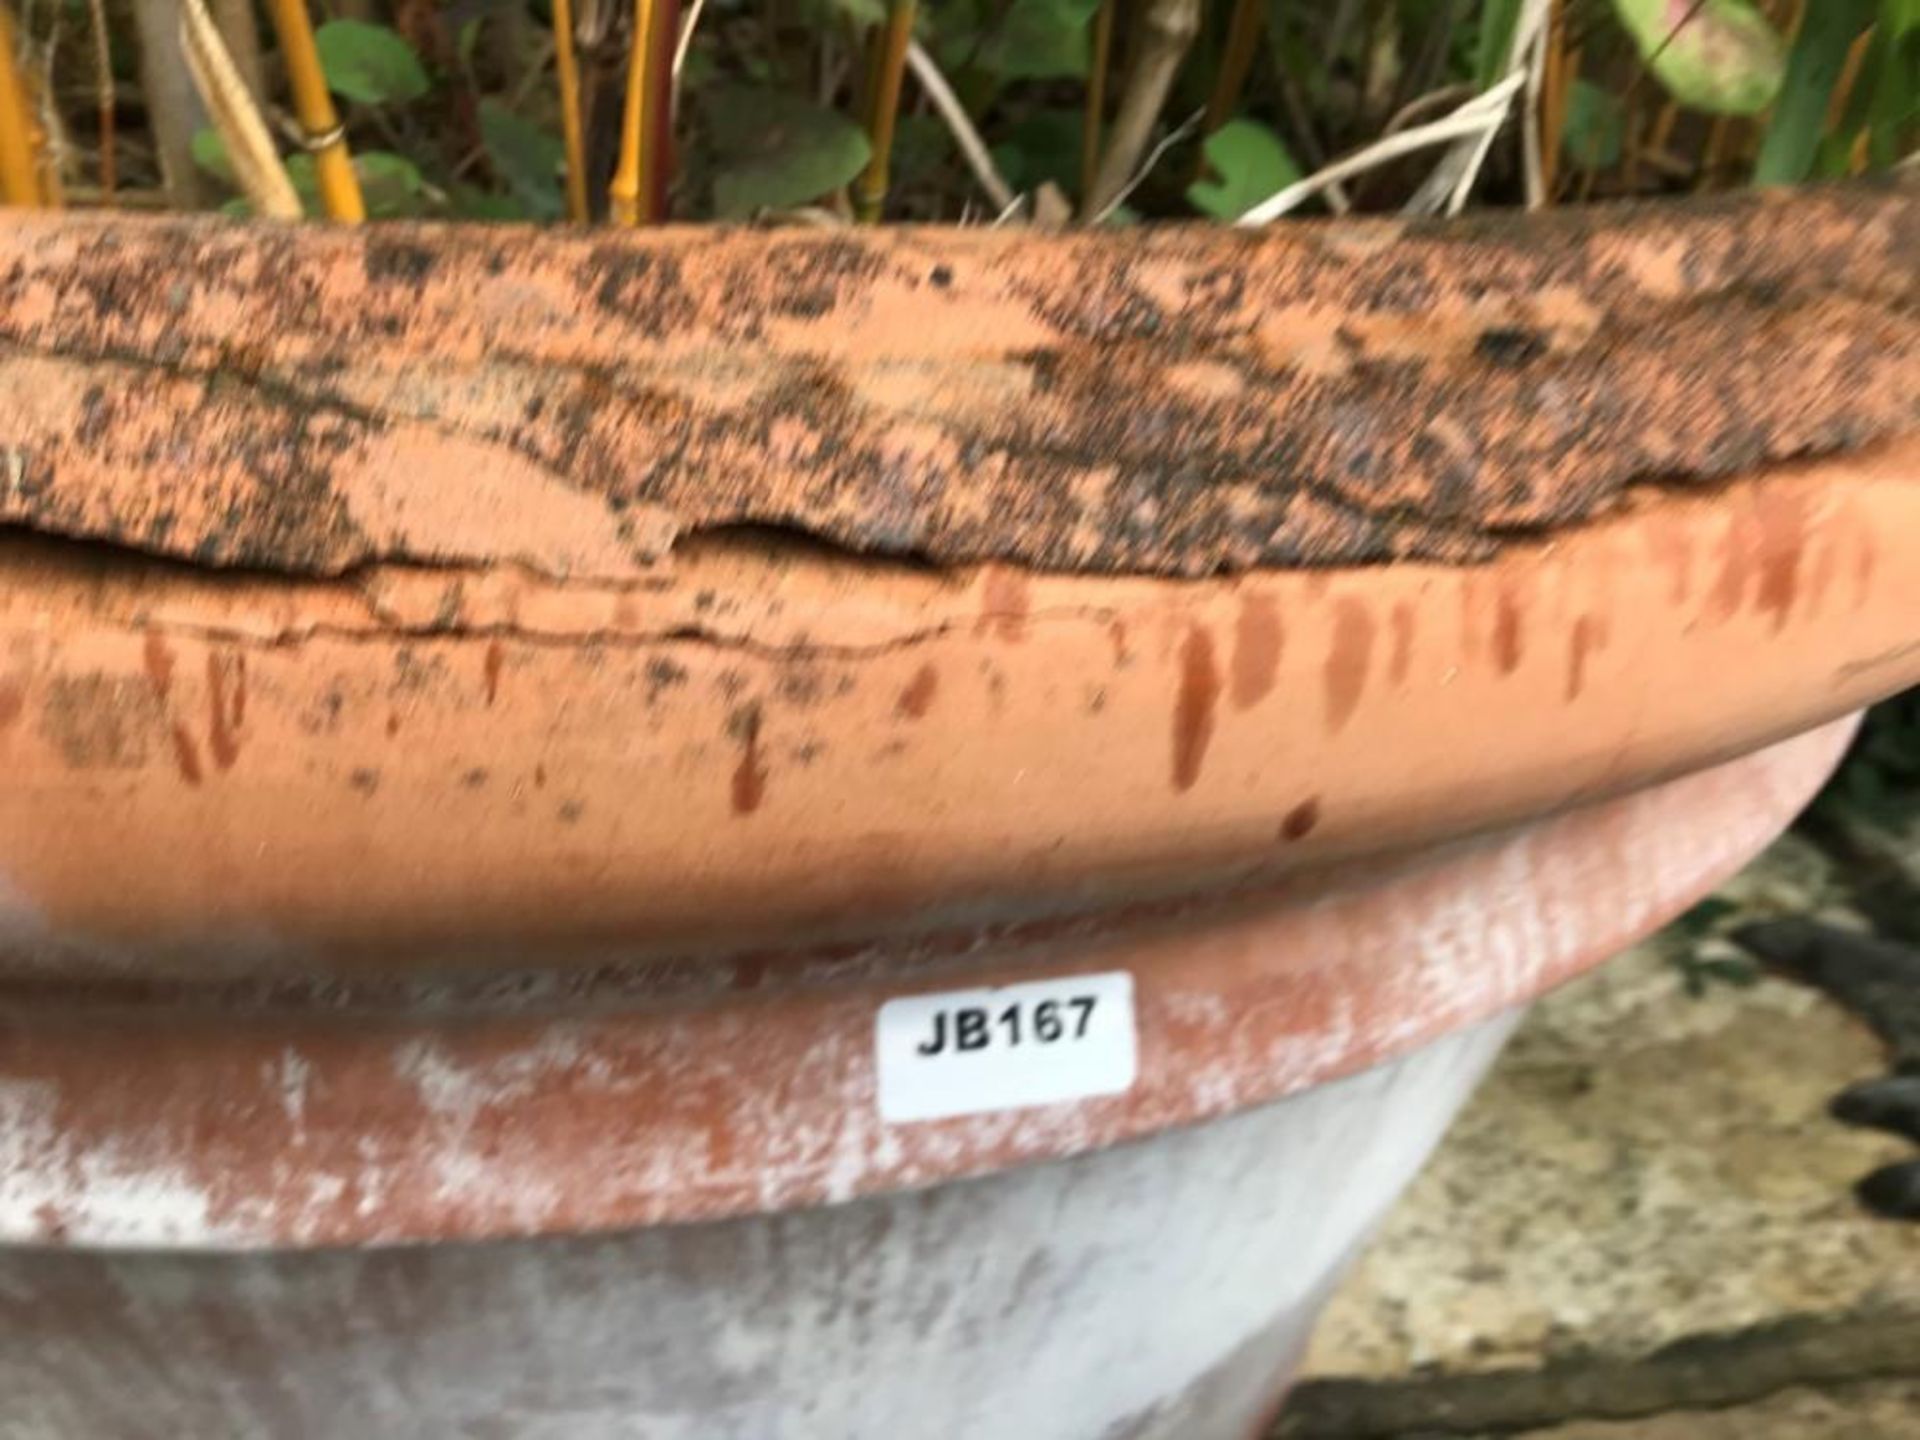 1 x Gigantic Ceramic Planter With A Diameter Of 115cm And A Height Of 75cm! - Ref: JB167 - Pre-Owned - Image 2 of 5